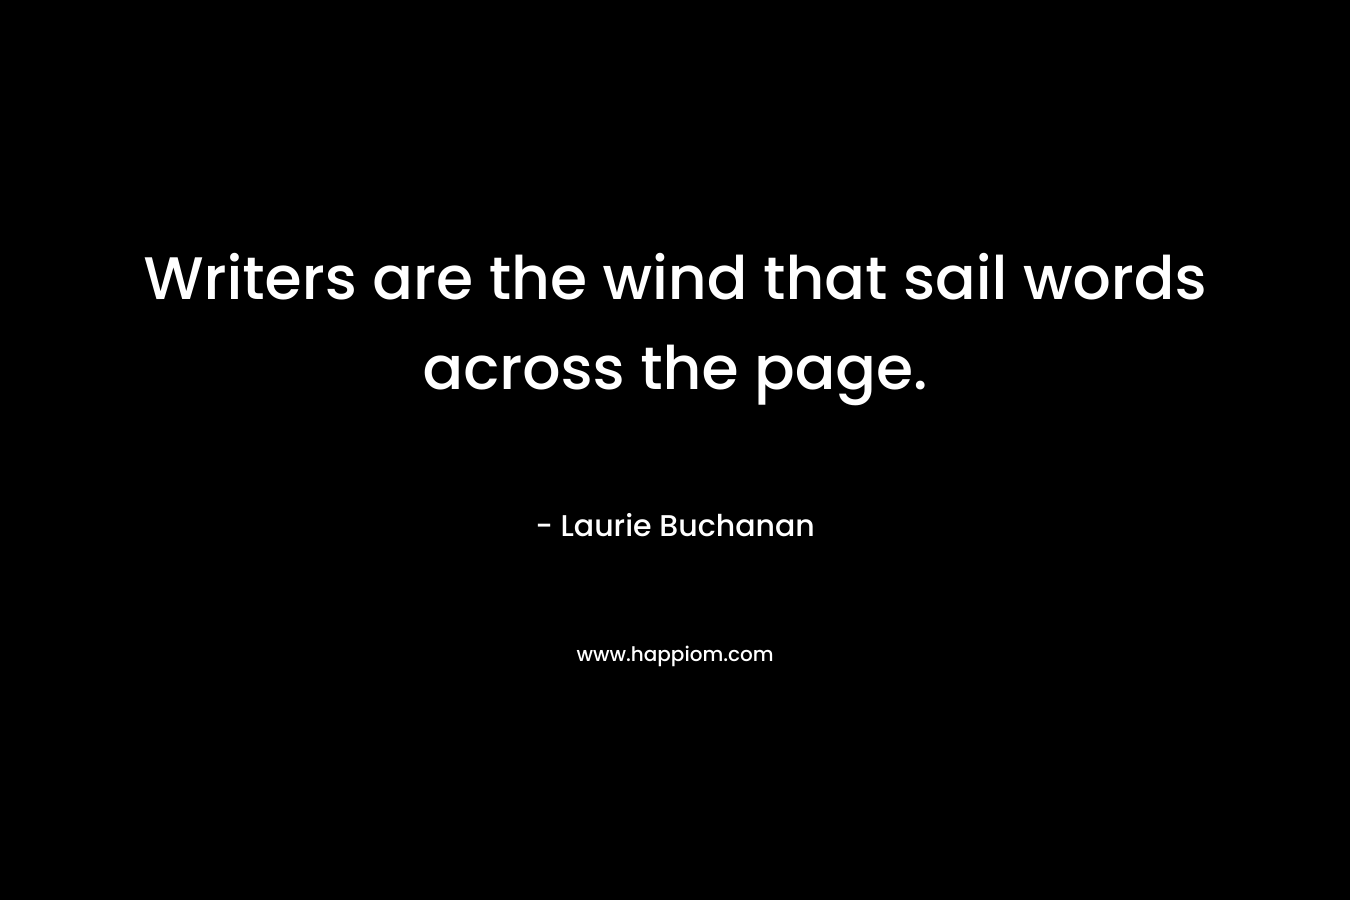 Writers are the wind that sail words across the page. – Laurie Buchanan